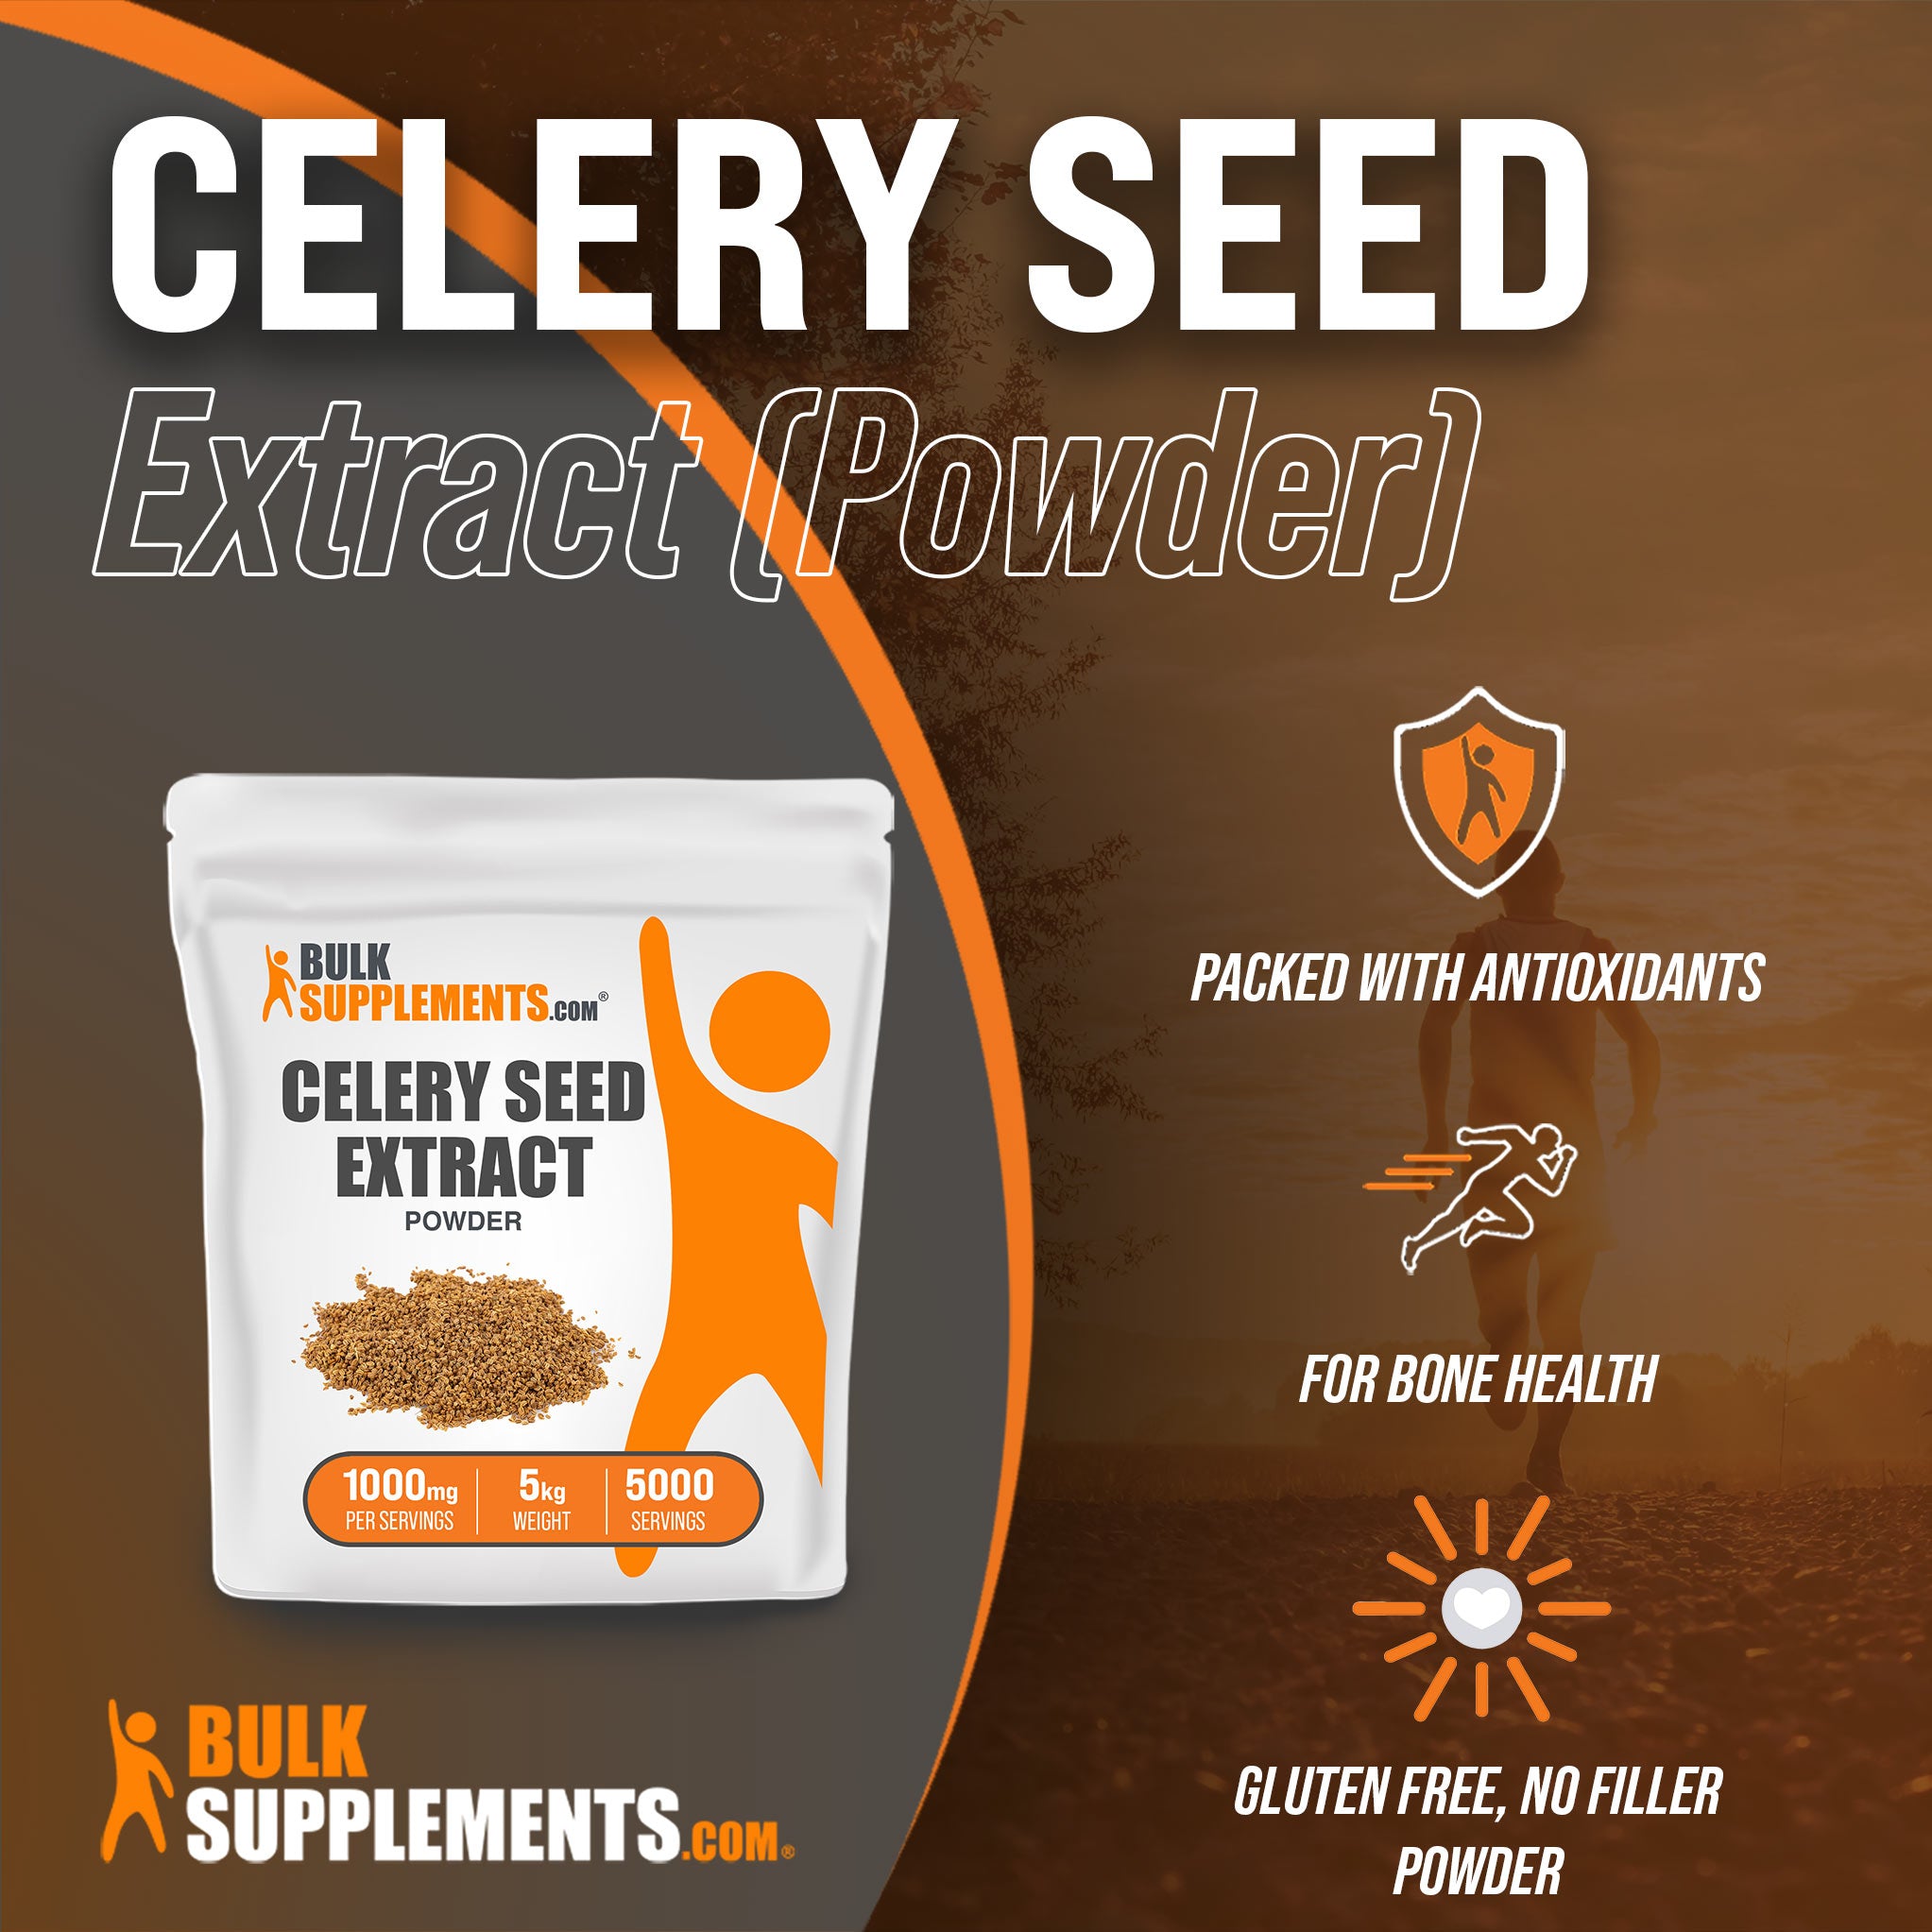 1kg celery seed extract is a perfect antioxidants supplement